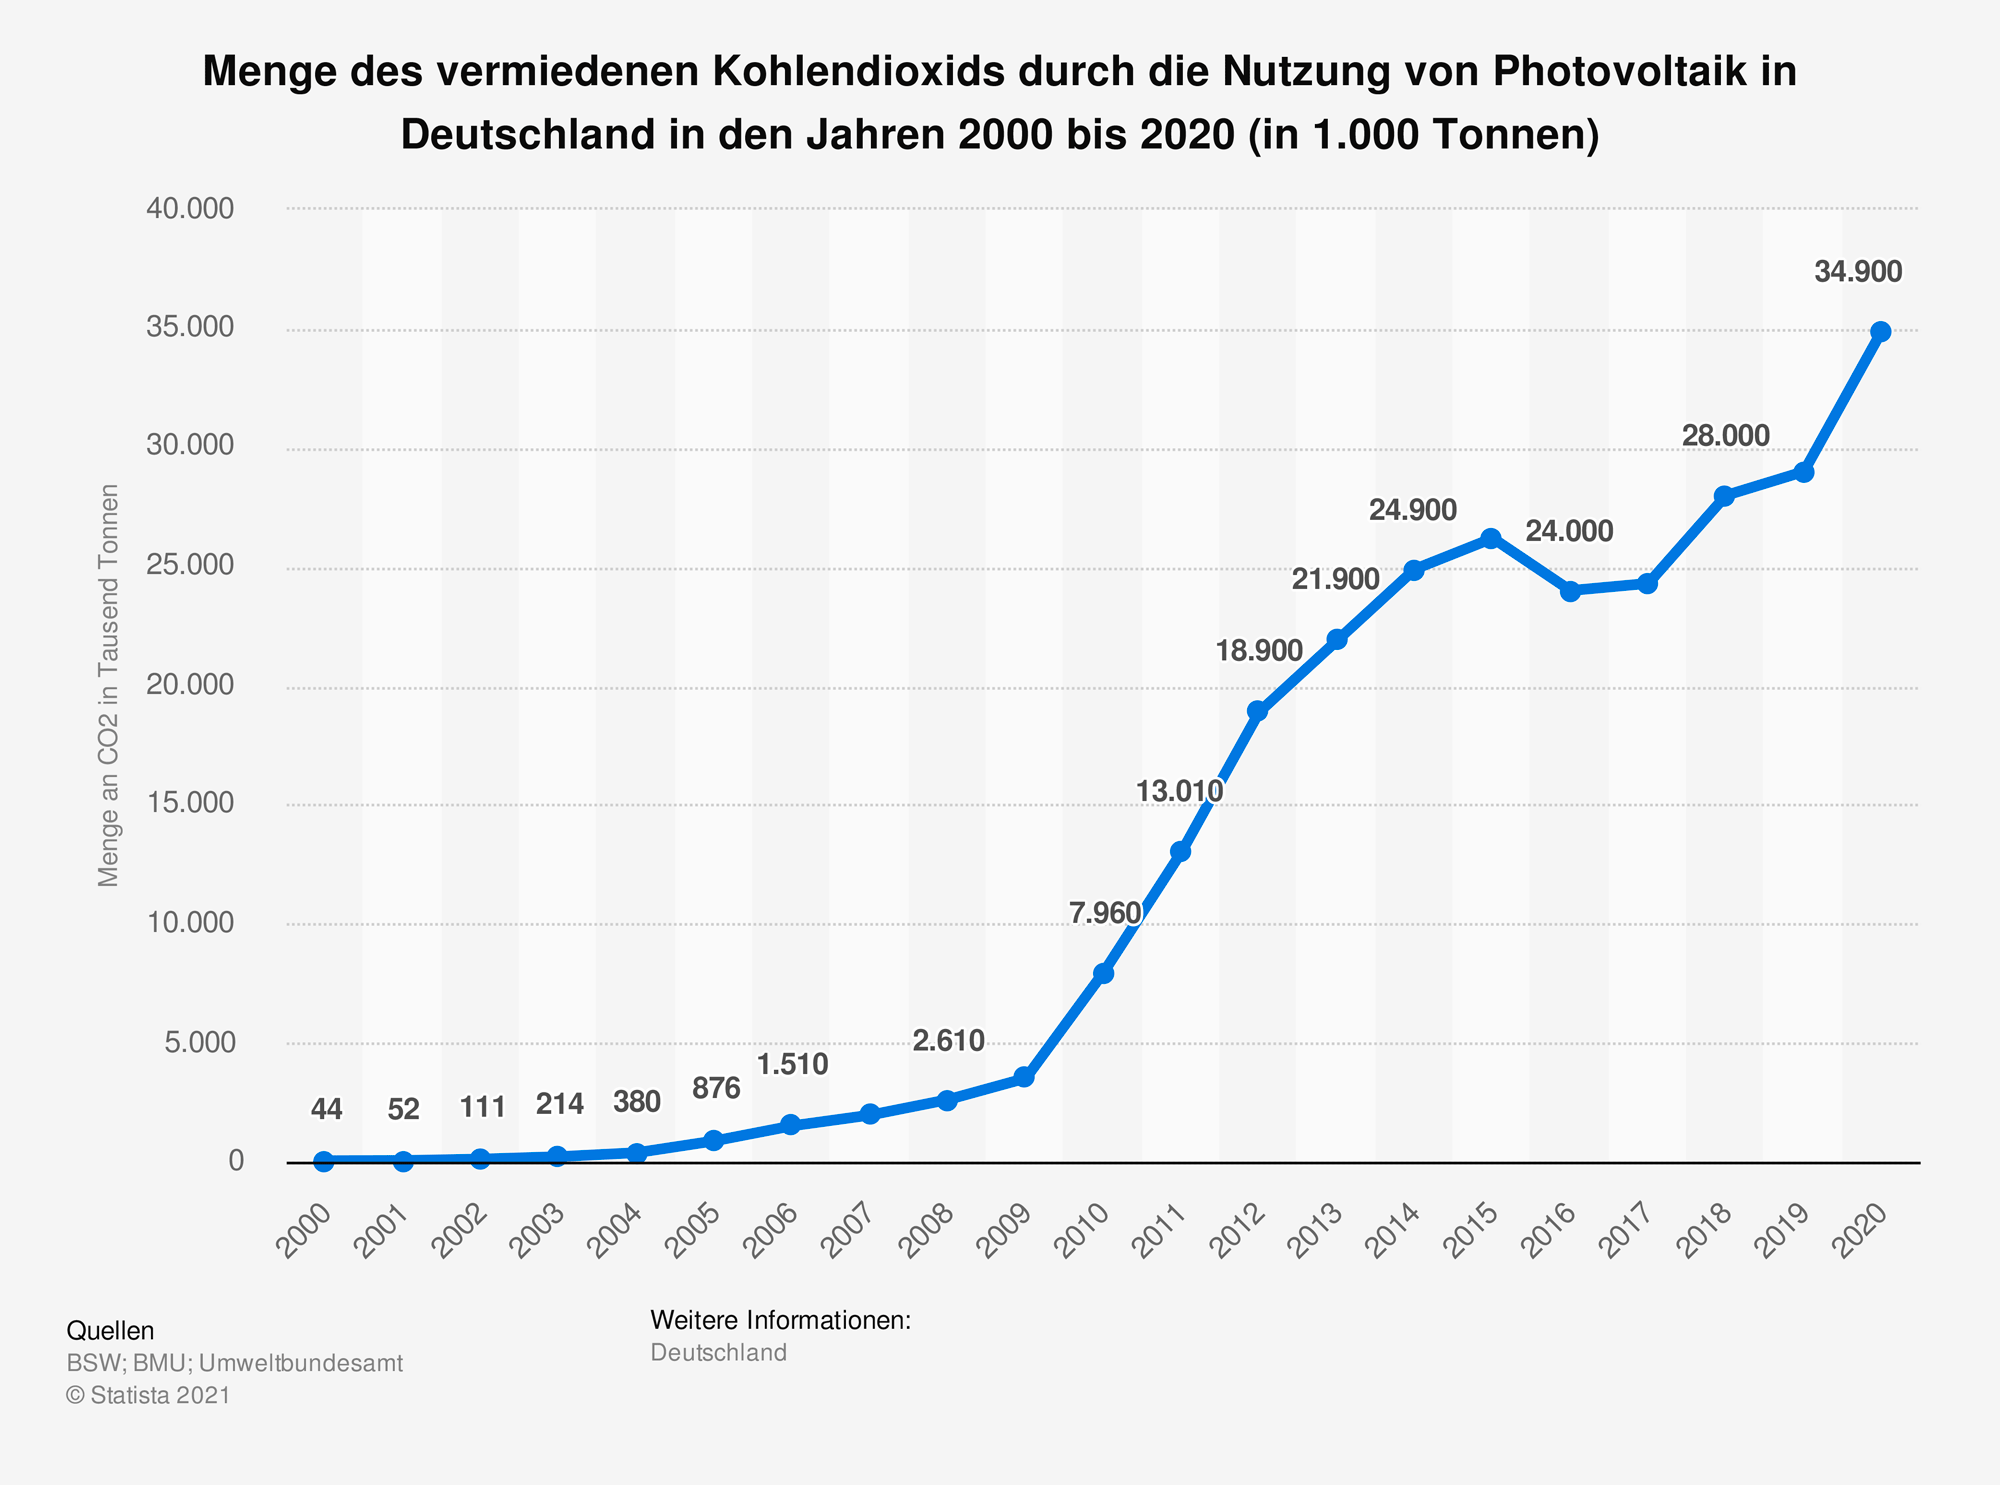 Amount of carbon dioxide avoided through the use of photovoltaic technology in Germany from 2000 to 2020 (in 1,000 tons) Sources: BSW; BMU; Federal Environment Agency; © Statista 2021